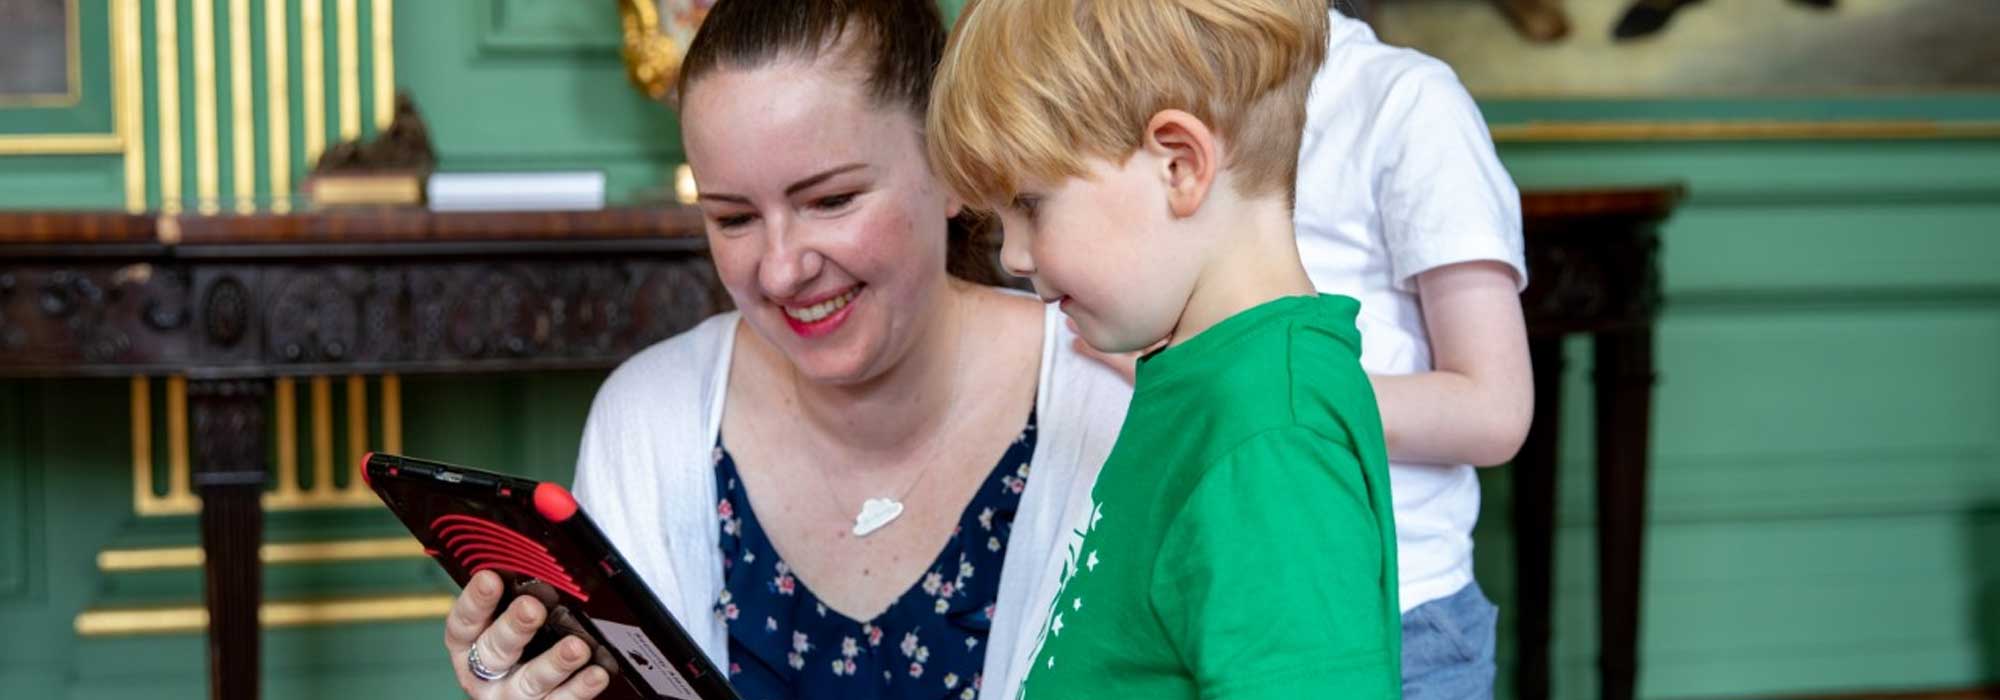 A lady is showing a little boy something on a tablet device and both are smiling